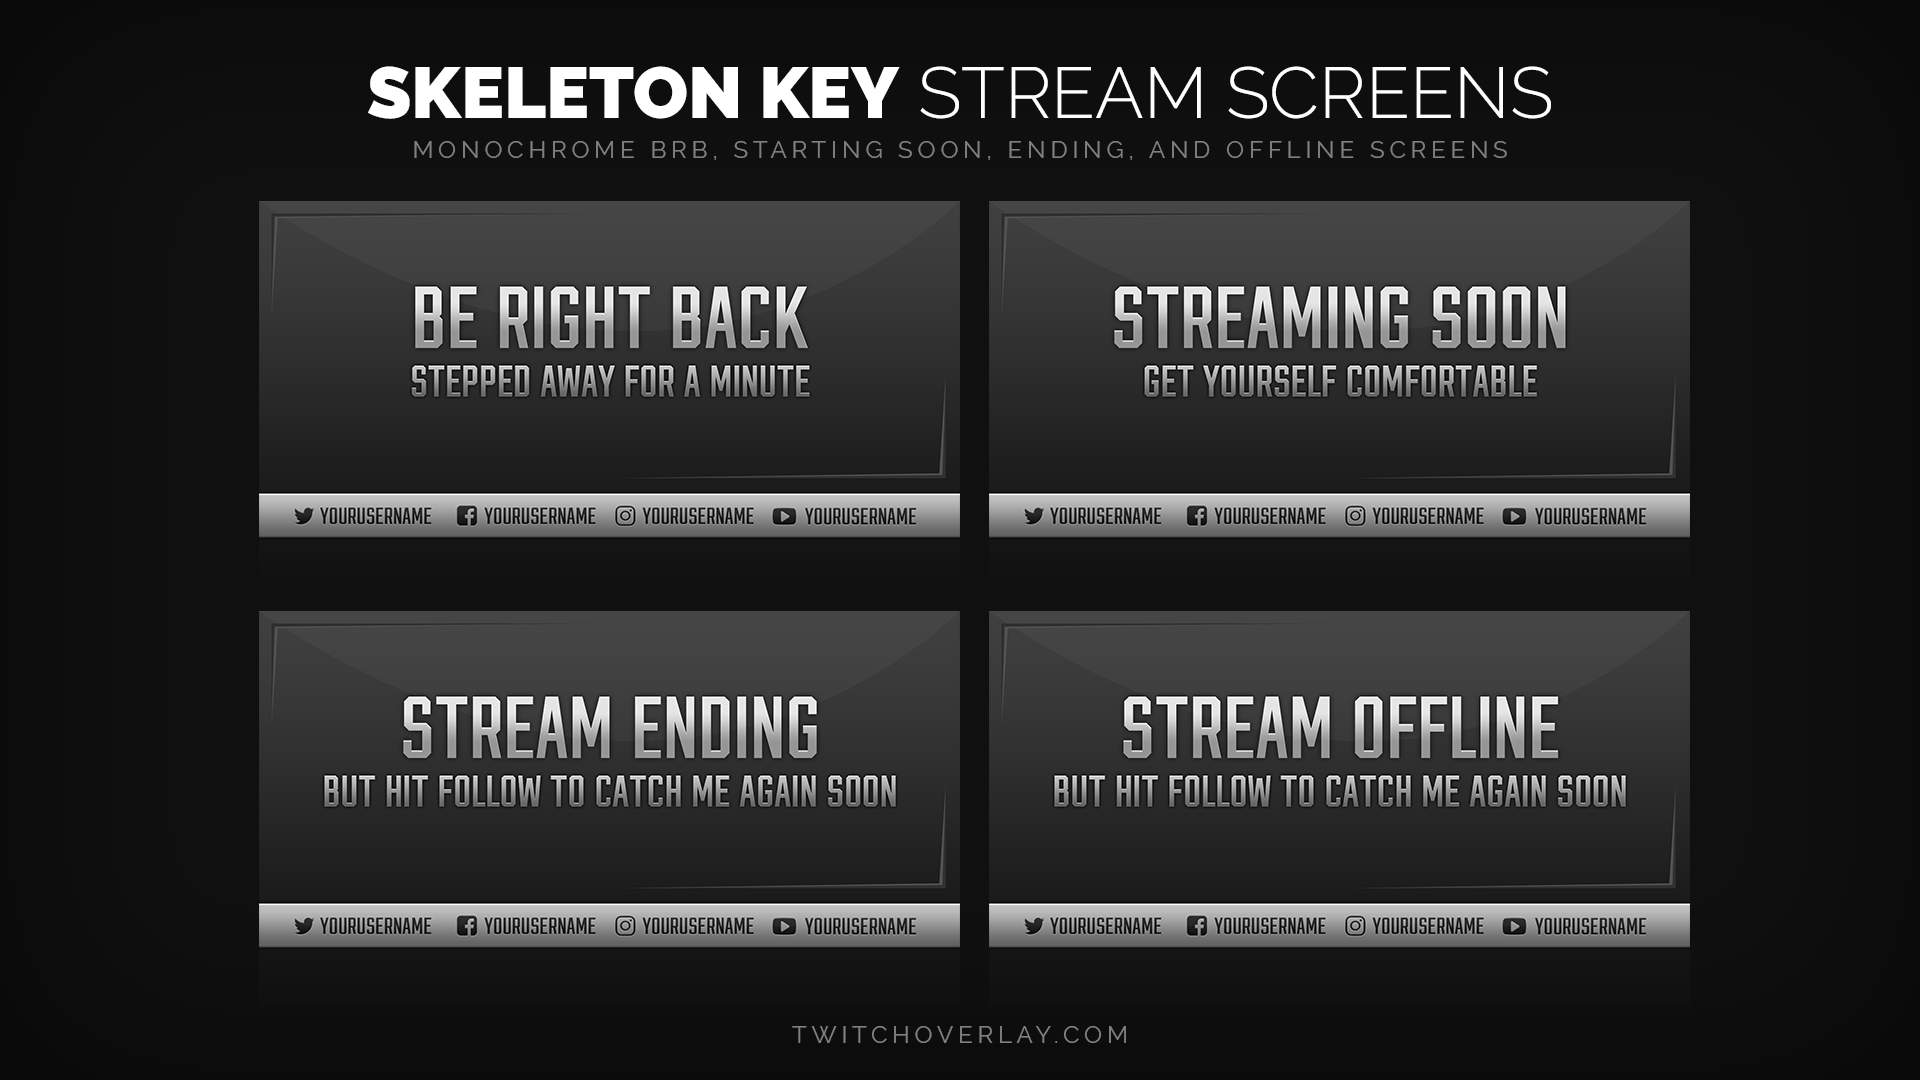 Twitch BRB Screens - The 7 Best Free & Premium Options